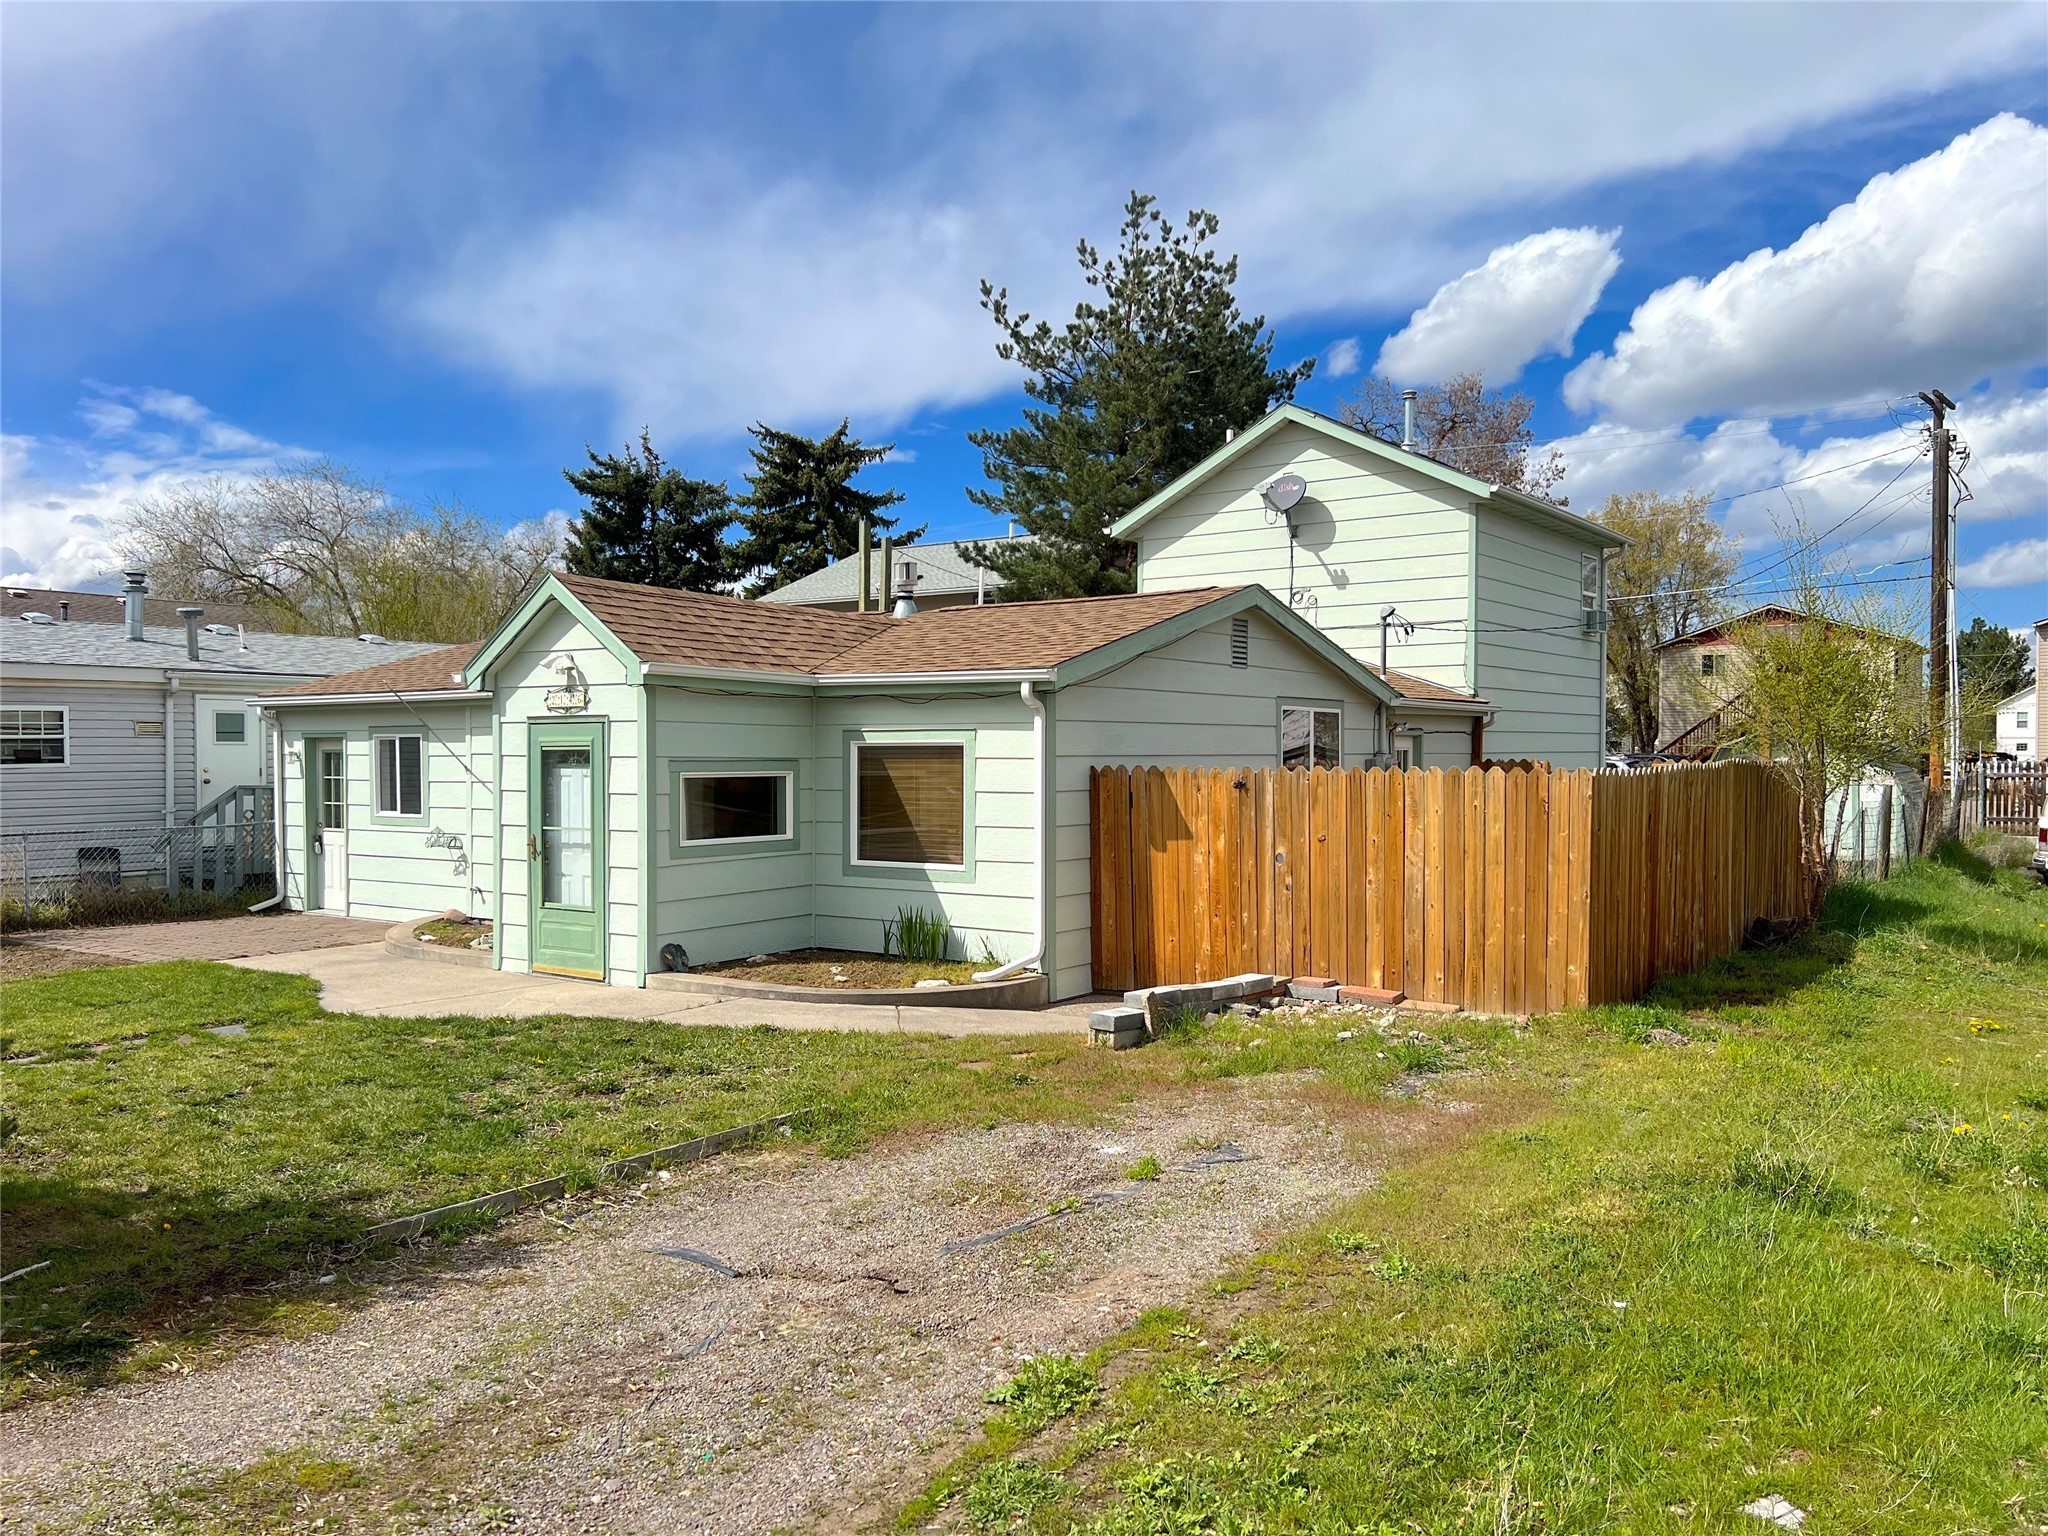 Affordable living with easy access to everything Missoula has to offer!  Walk to Southgate Mall, close to multiple grocery stores and community hospital.  Move in ready with plenty of options for future updates.  Room for garage or larger storage shed in the backyard.  Located at the end of a cul-de-sac in a low traffic location.